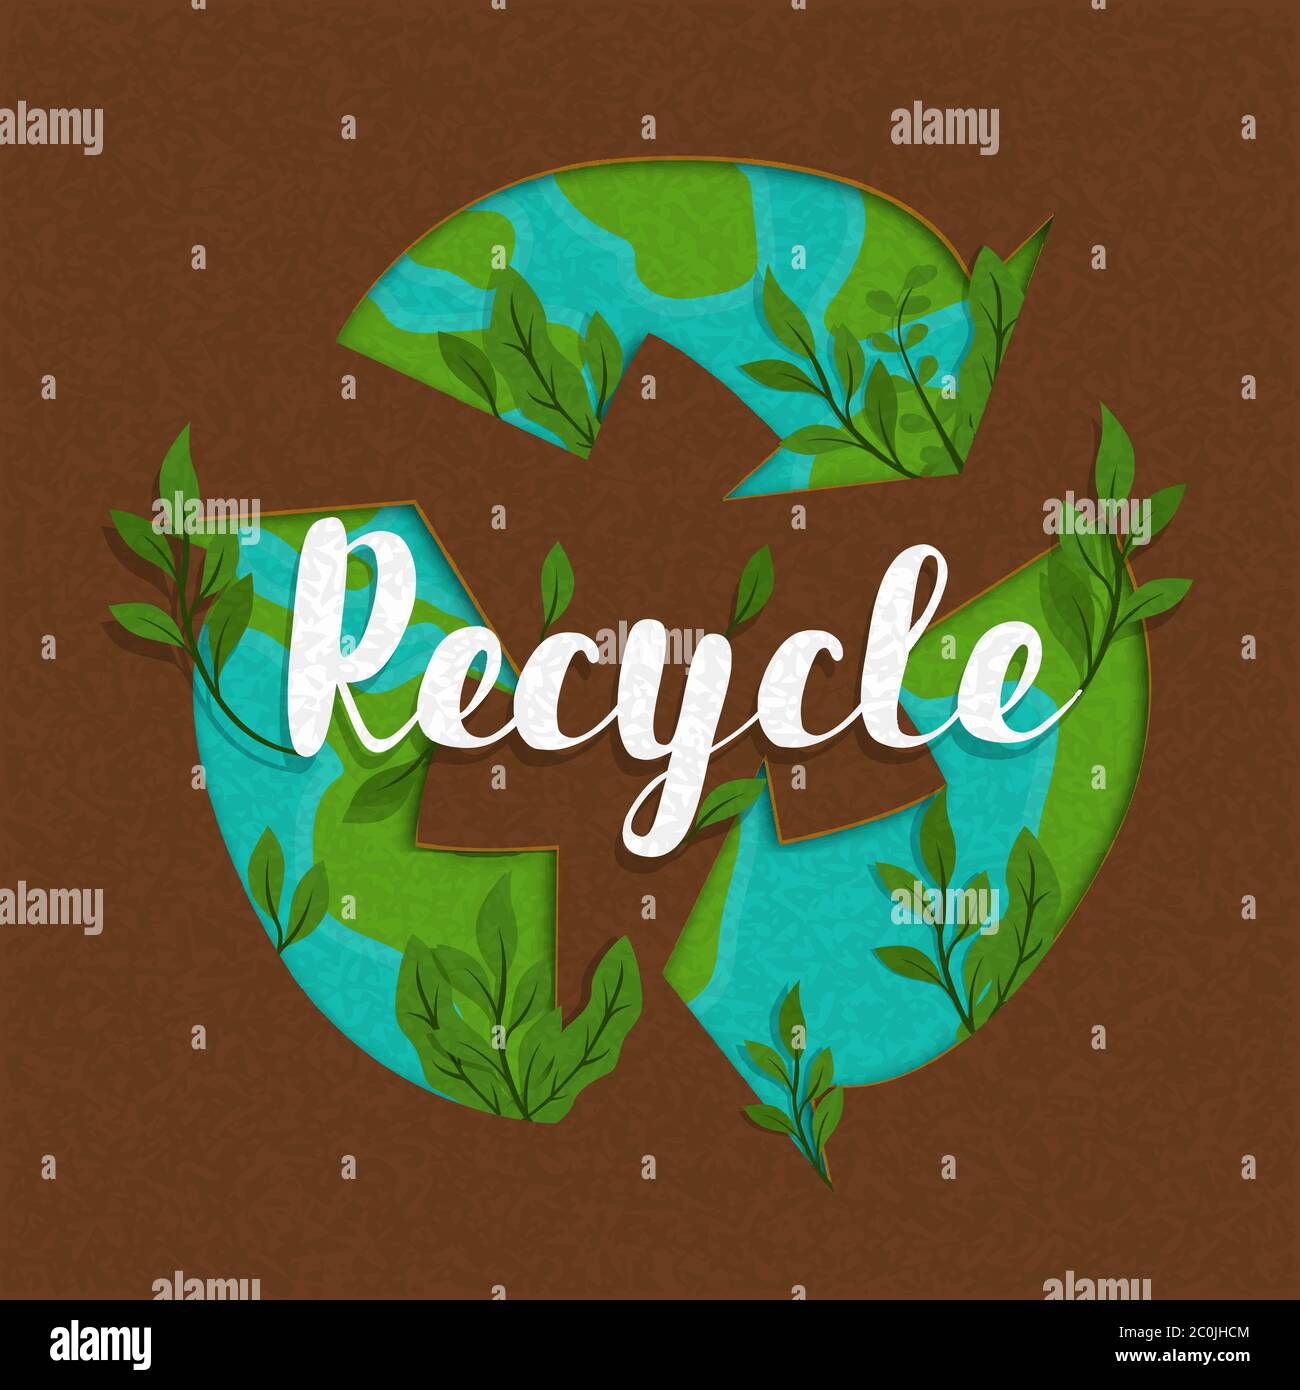 Recycle symbol illustration with green earth planet map and plant leaf in recycled paper texture. Environment help concept for recycling activity. Stock Vector